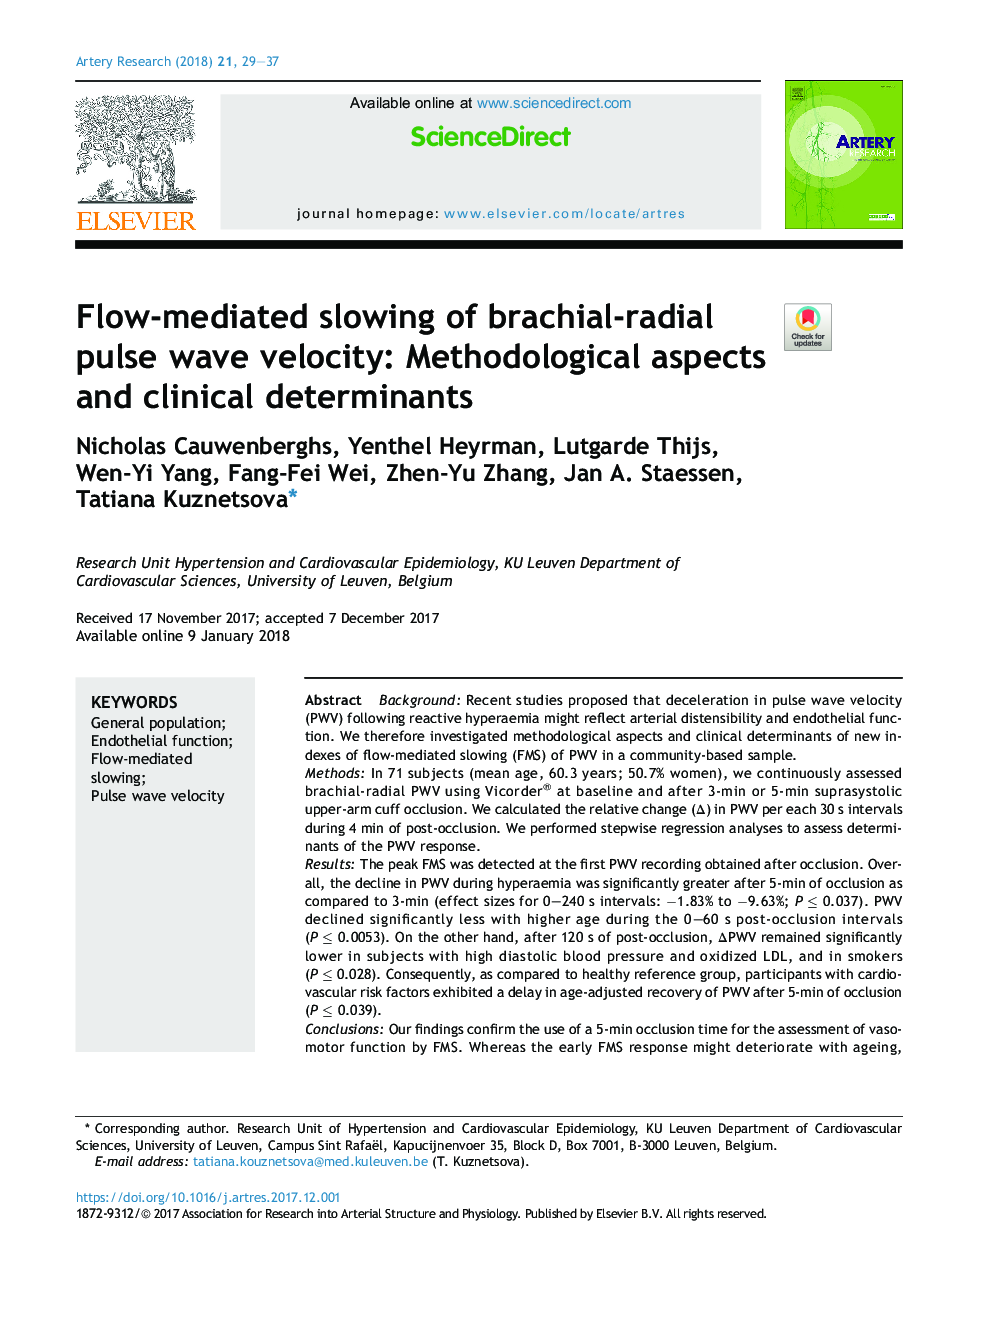 Flow-mediated slowing of brachial-radial pulse wave velocity: Methodological aspects and clinical determinants